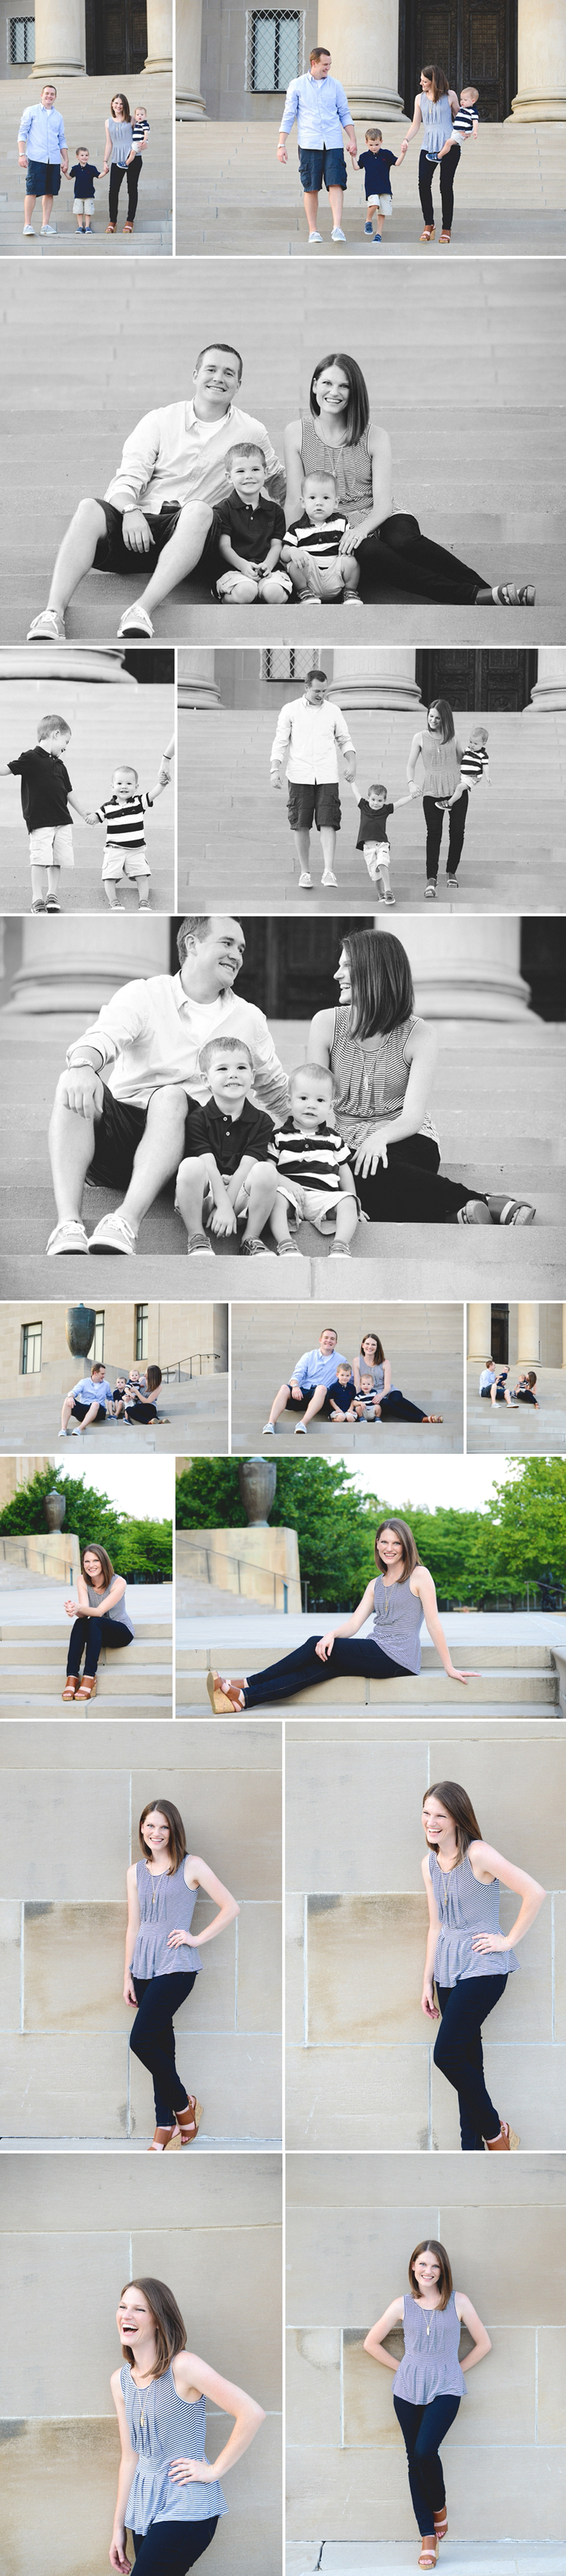 nelson-atkins-family_3